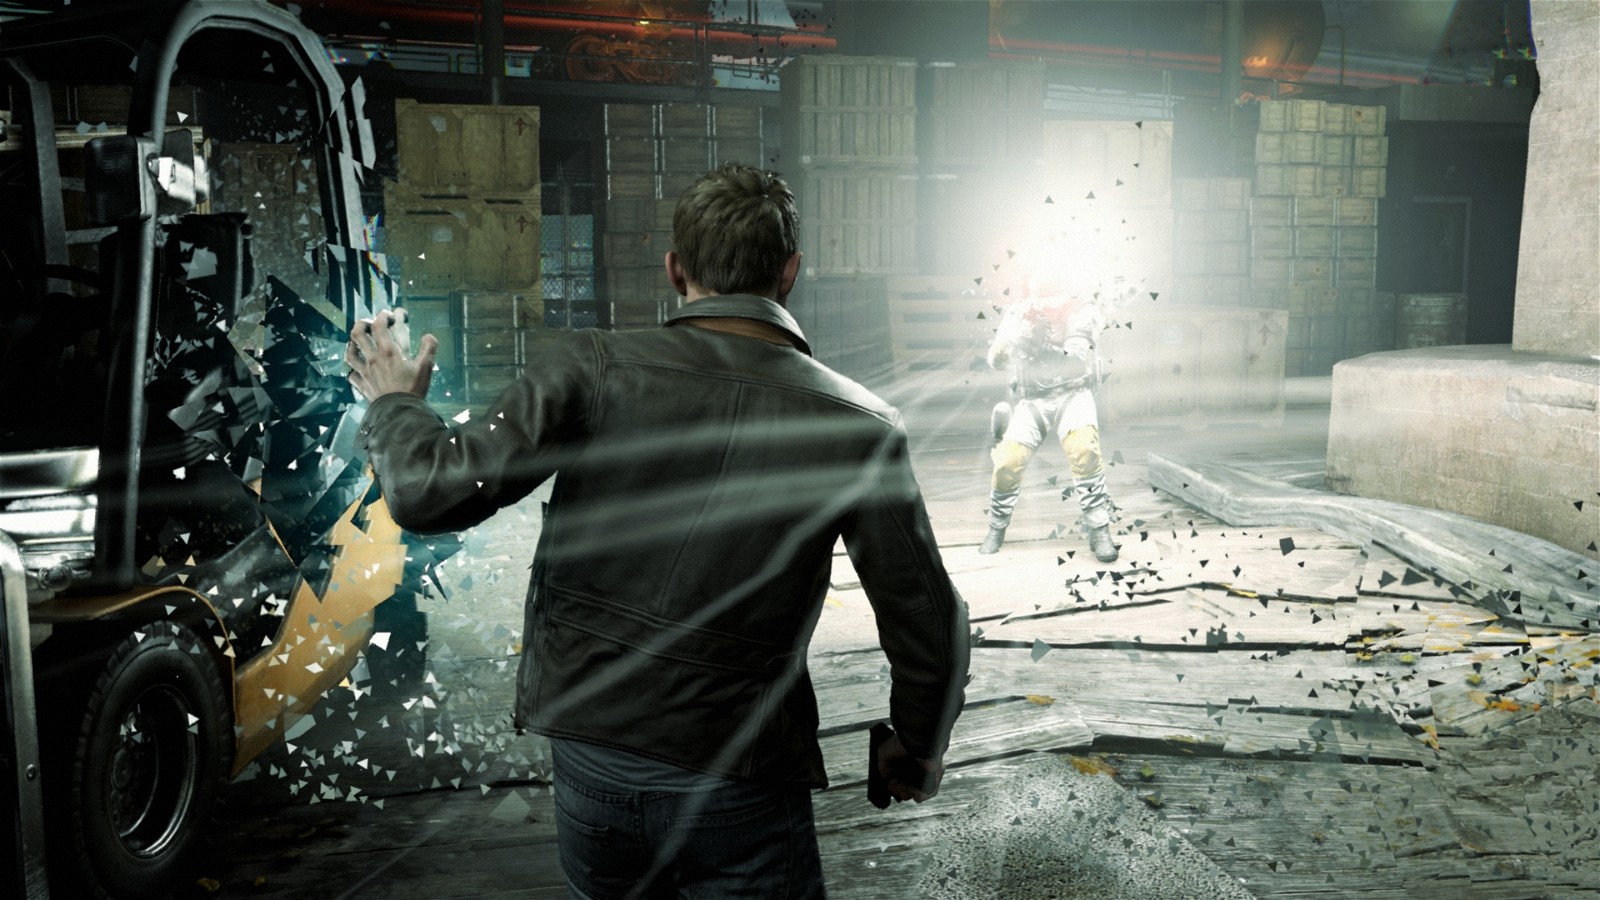 Microsoft holds the right to Quantum break and they sold the rights of Max Payne IP to Take-Two and Rockstar.